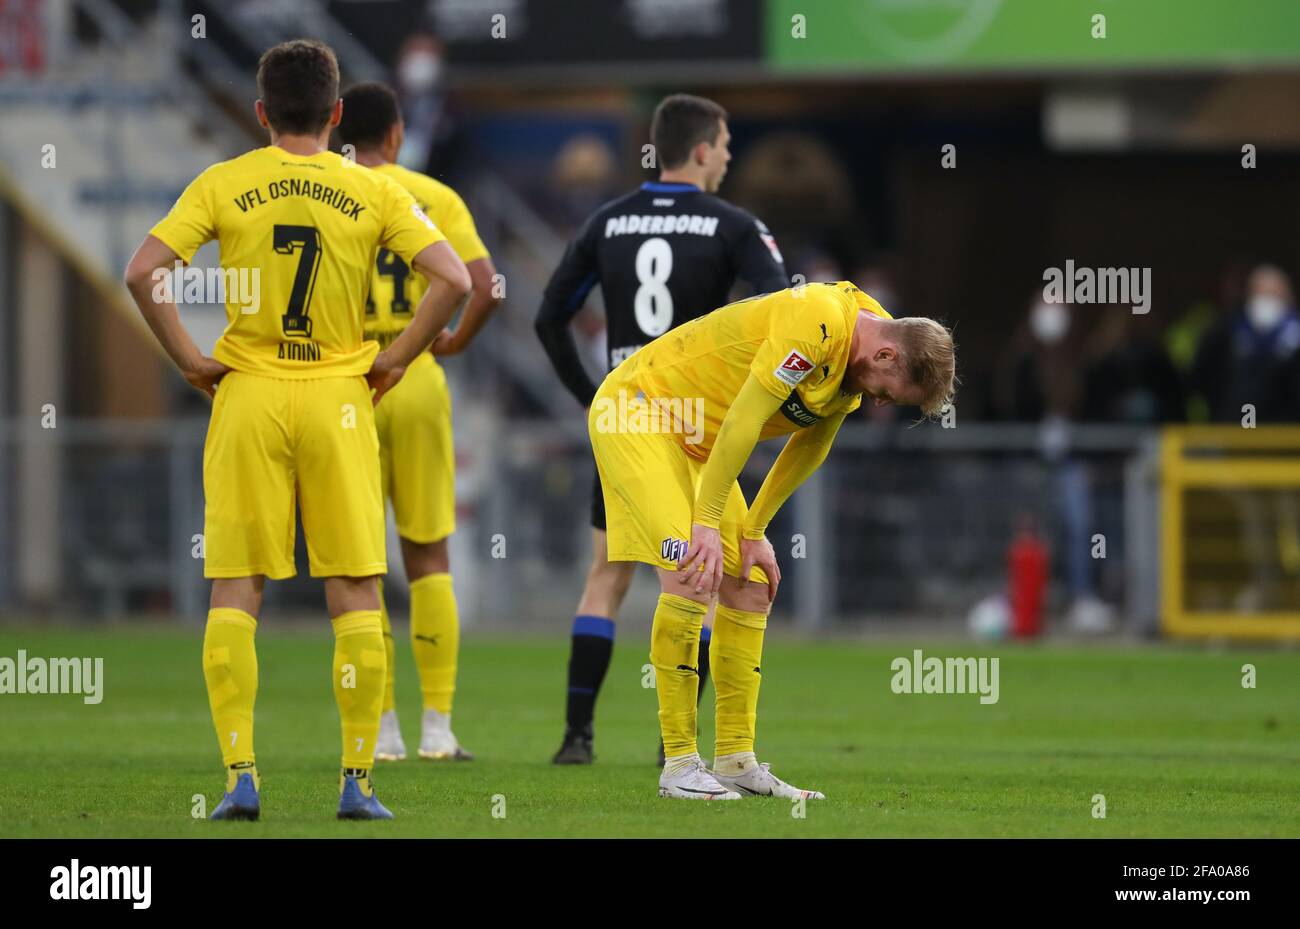 Paderborn, Germany. 21st Apr, 2021. Football: 2. Bundesliga, SC Paderborn 07 - VfL Osnabrück, Matchday 30 at Benteler-Arena. Osnabrück's Bashkim Ajdini and Sebastian Kerk (r) look disappointed at the end of the match. Credit: Friso Gentsch/dpa - IMPORTANT NOTE: In accordance with the regulations of the DFL Deutsche Fußball Liga and/or the DFB Deutscher Fußball-Bund, it is prohibited to use or have used photographs taken in the stadium and/or of the match in the form of sequence pictures and/or video-like photo series./dpa/Alamy Live News Stock Photo